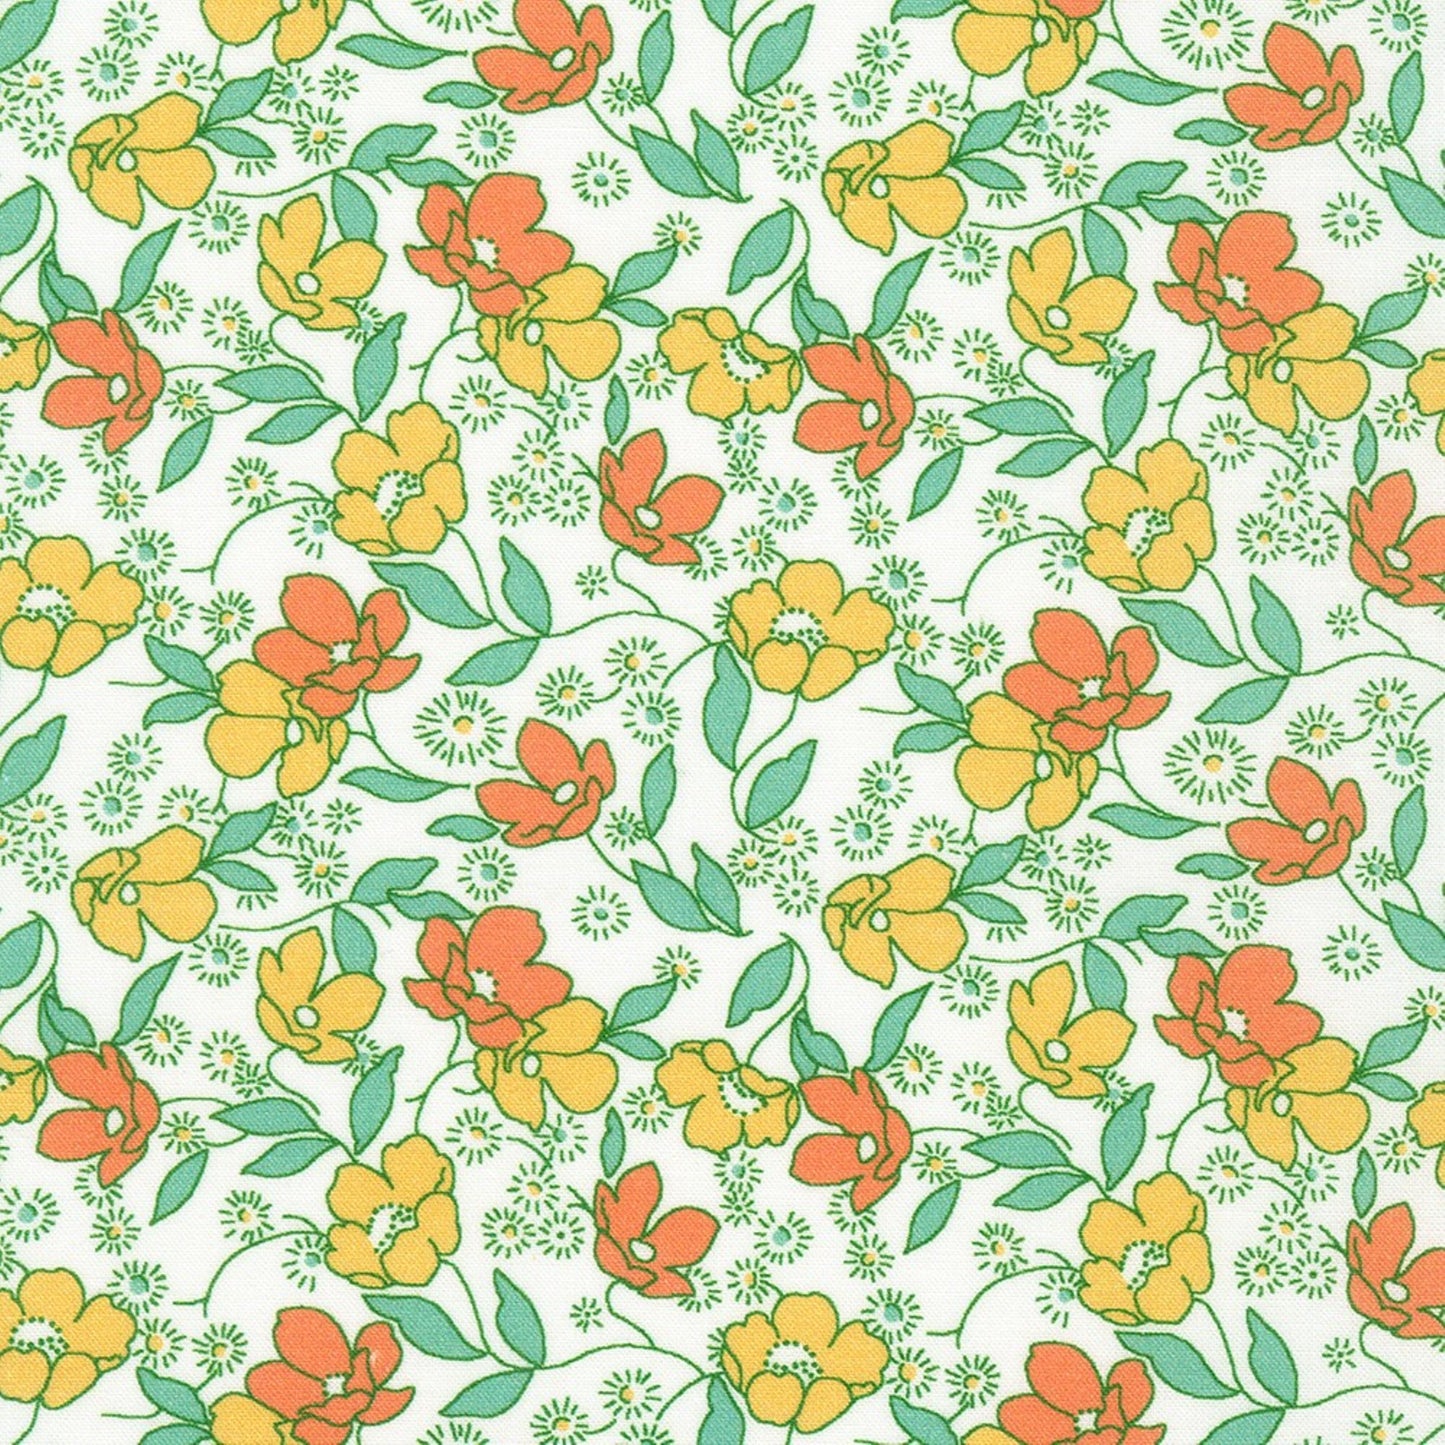 Little Blossoms Blooms sunshine yellow 1930's style floral Kaufman cotton quilt fabric